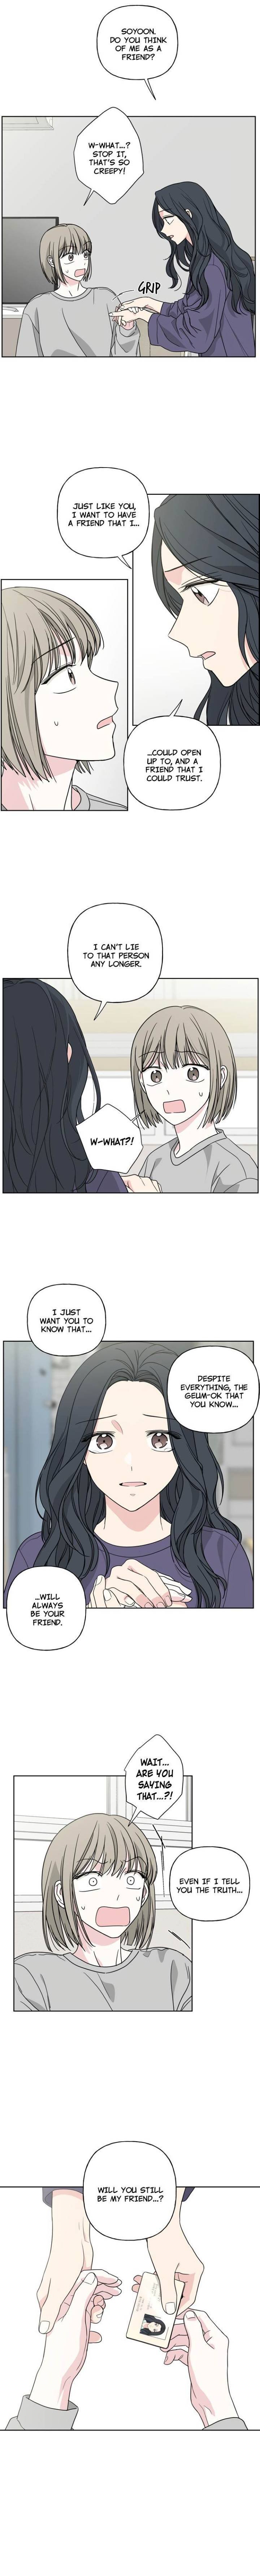 mother-im-sorry-chap-34-11